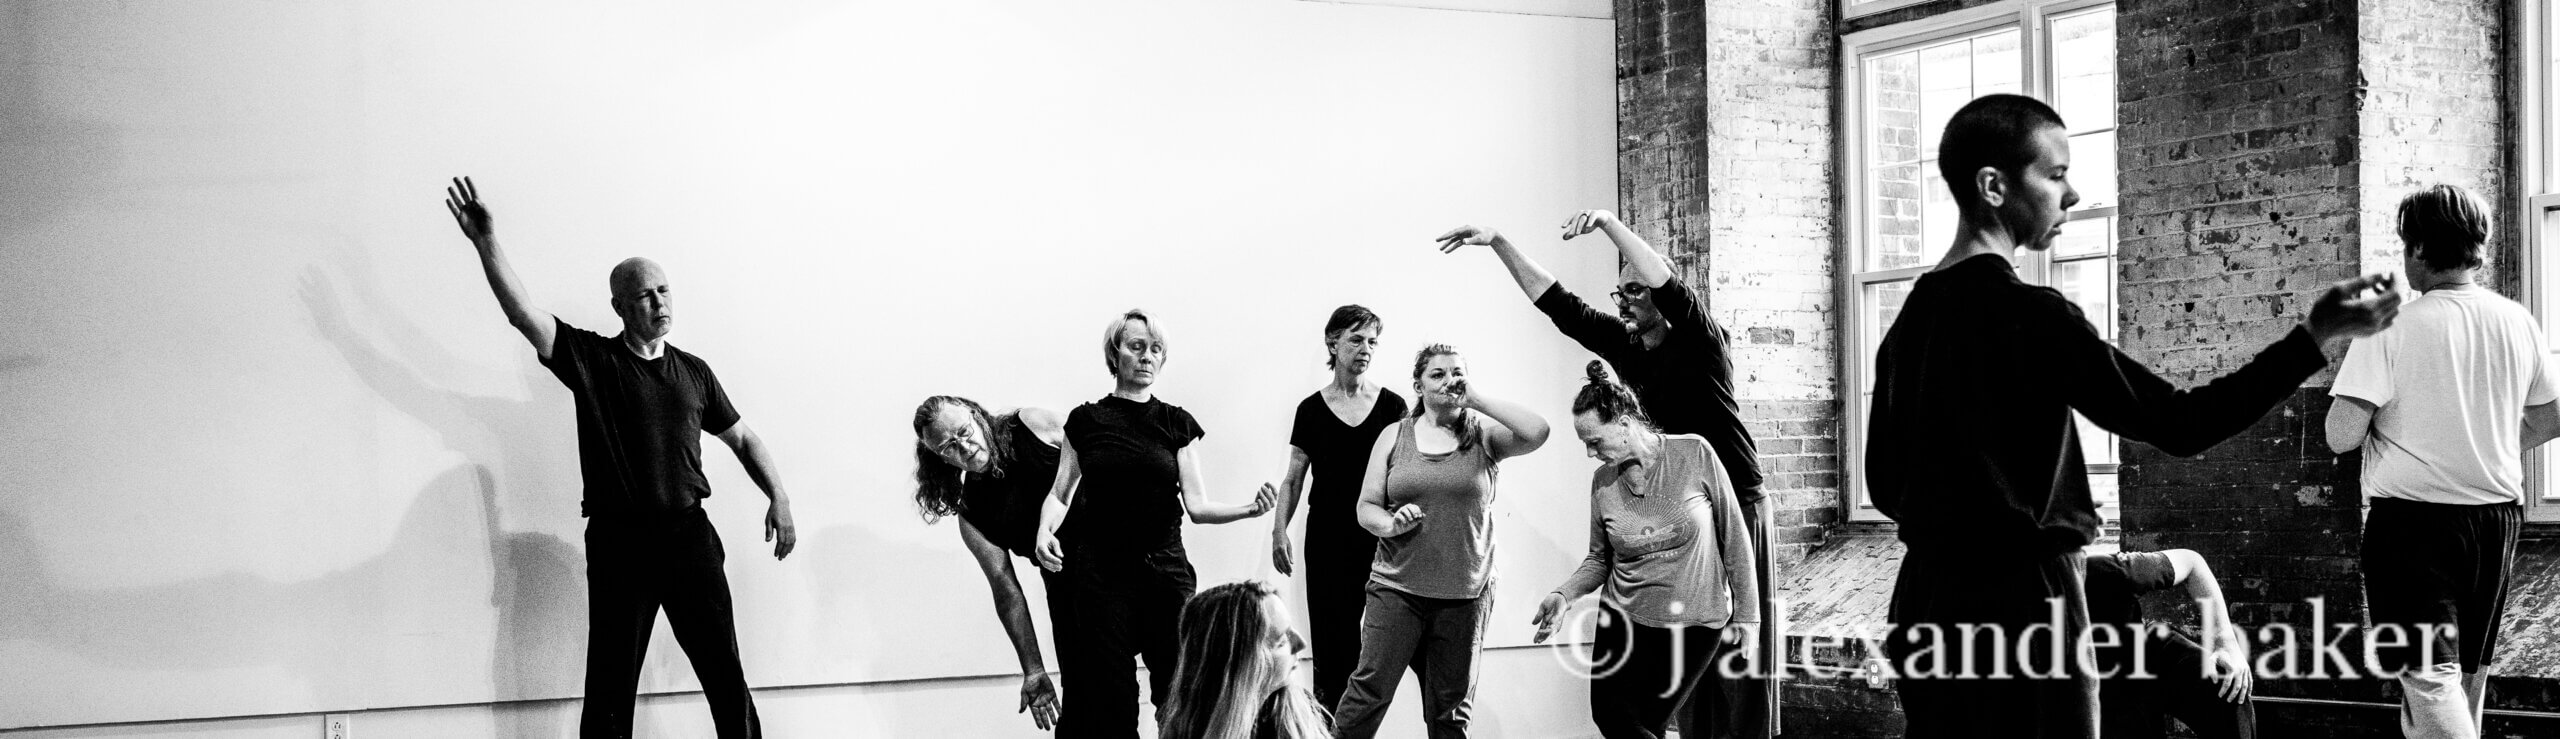 A black and white image of people in various poses during an improvisational movement performance